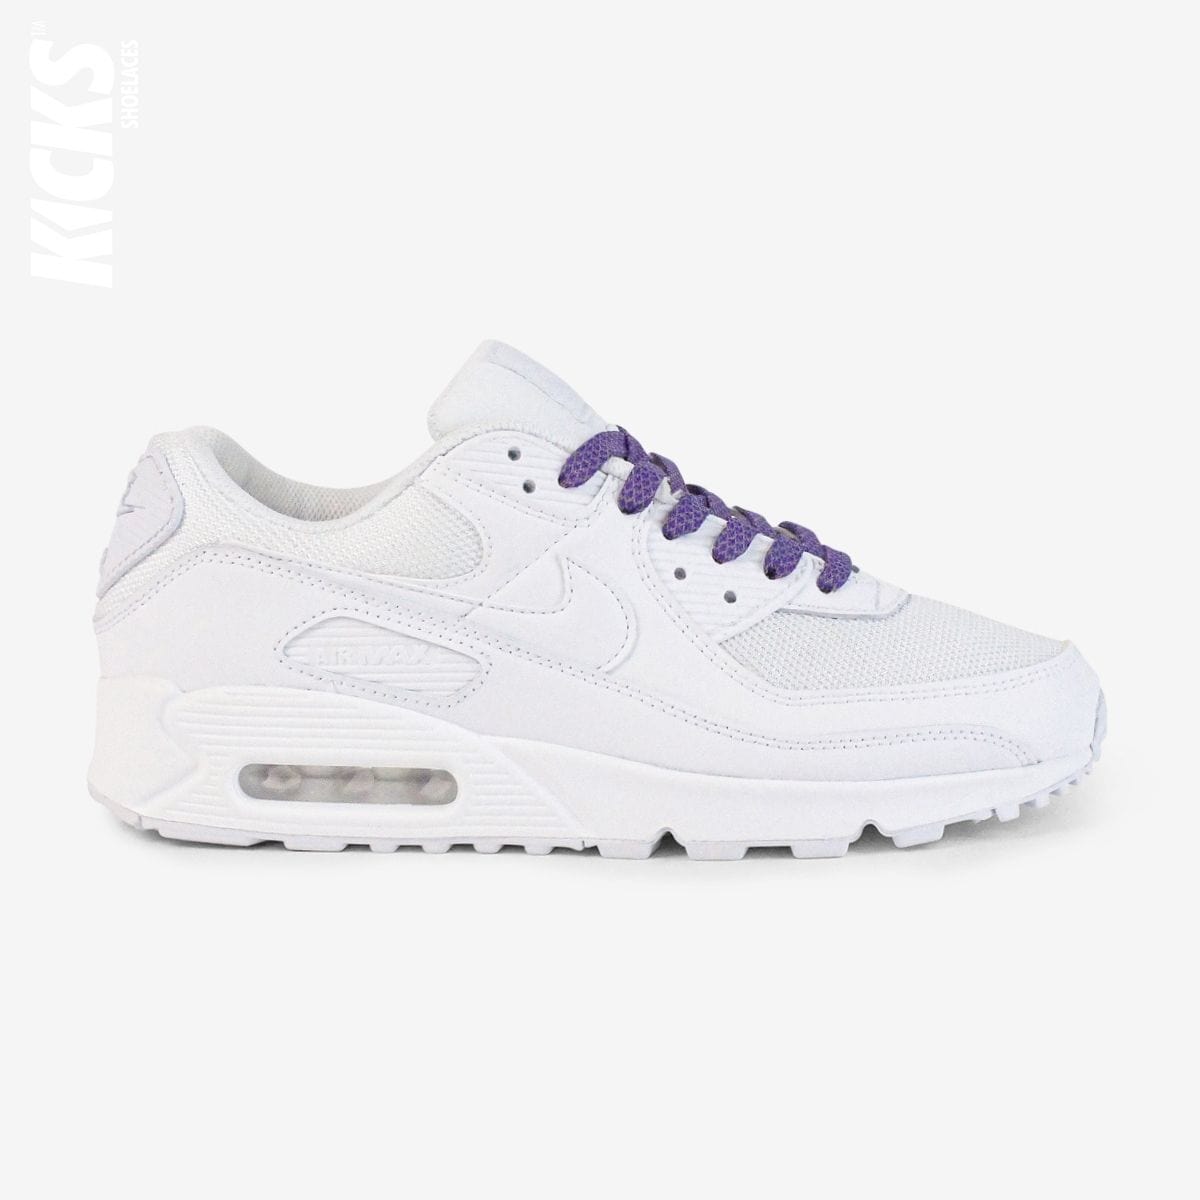 flat-laces-in-purple-on-white-shoes